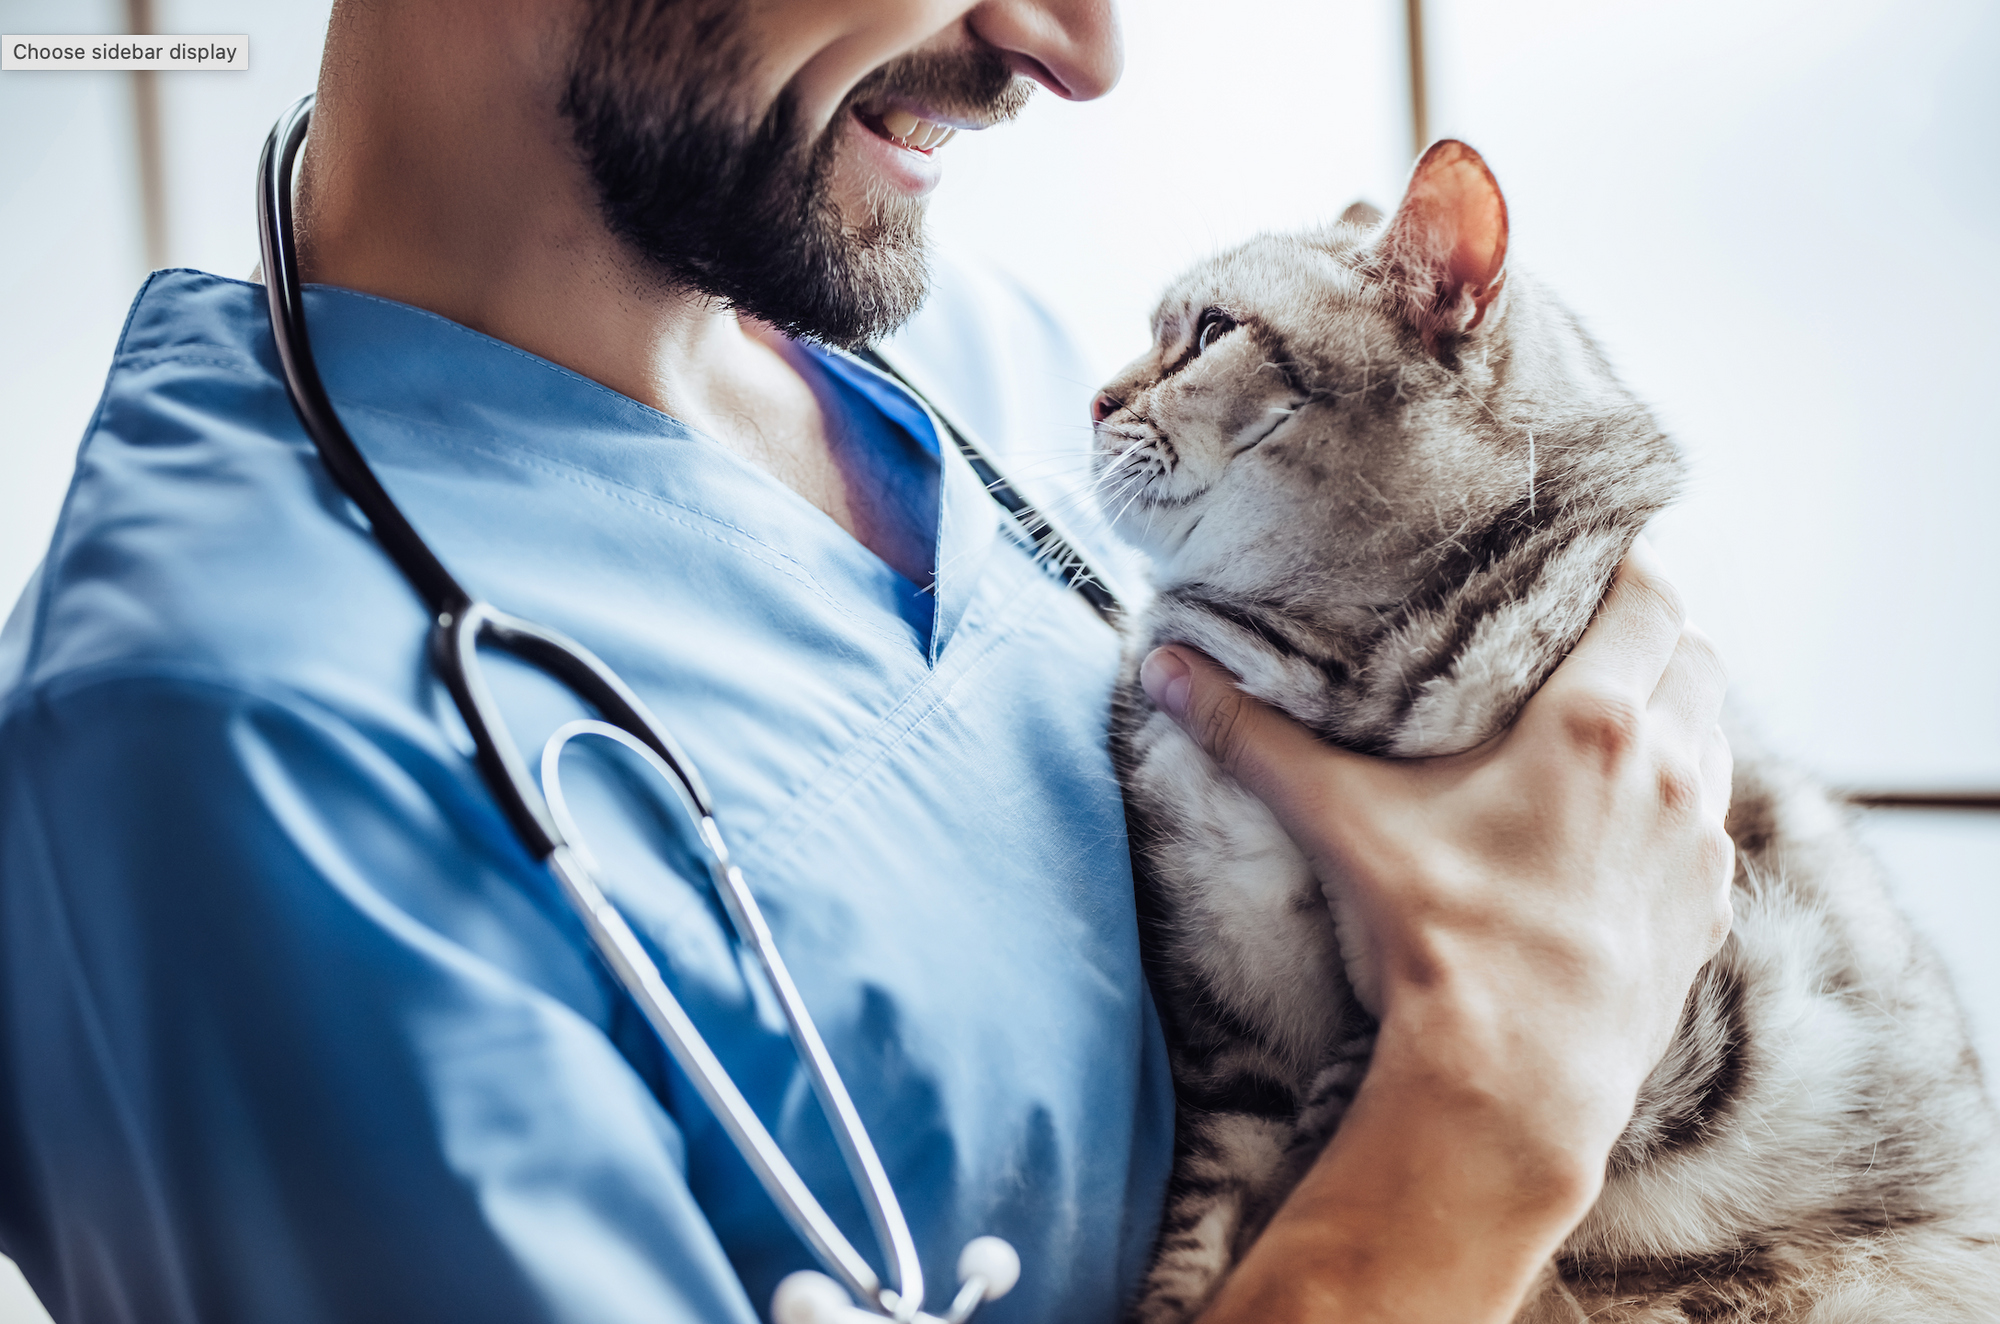 A man holding a cat with a stethoscope.